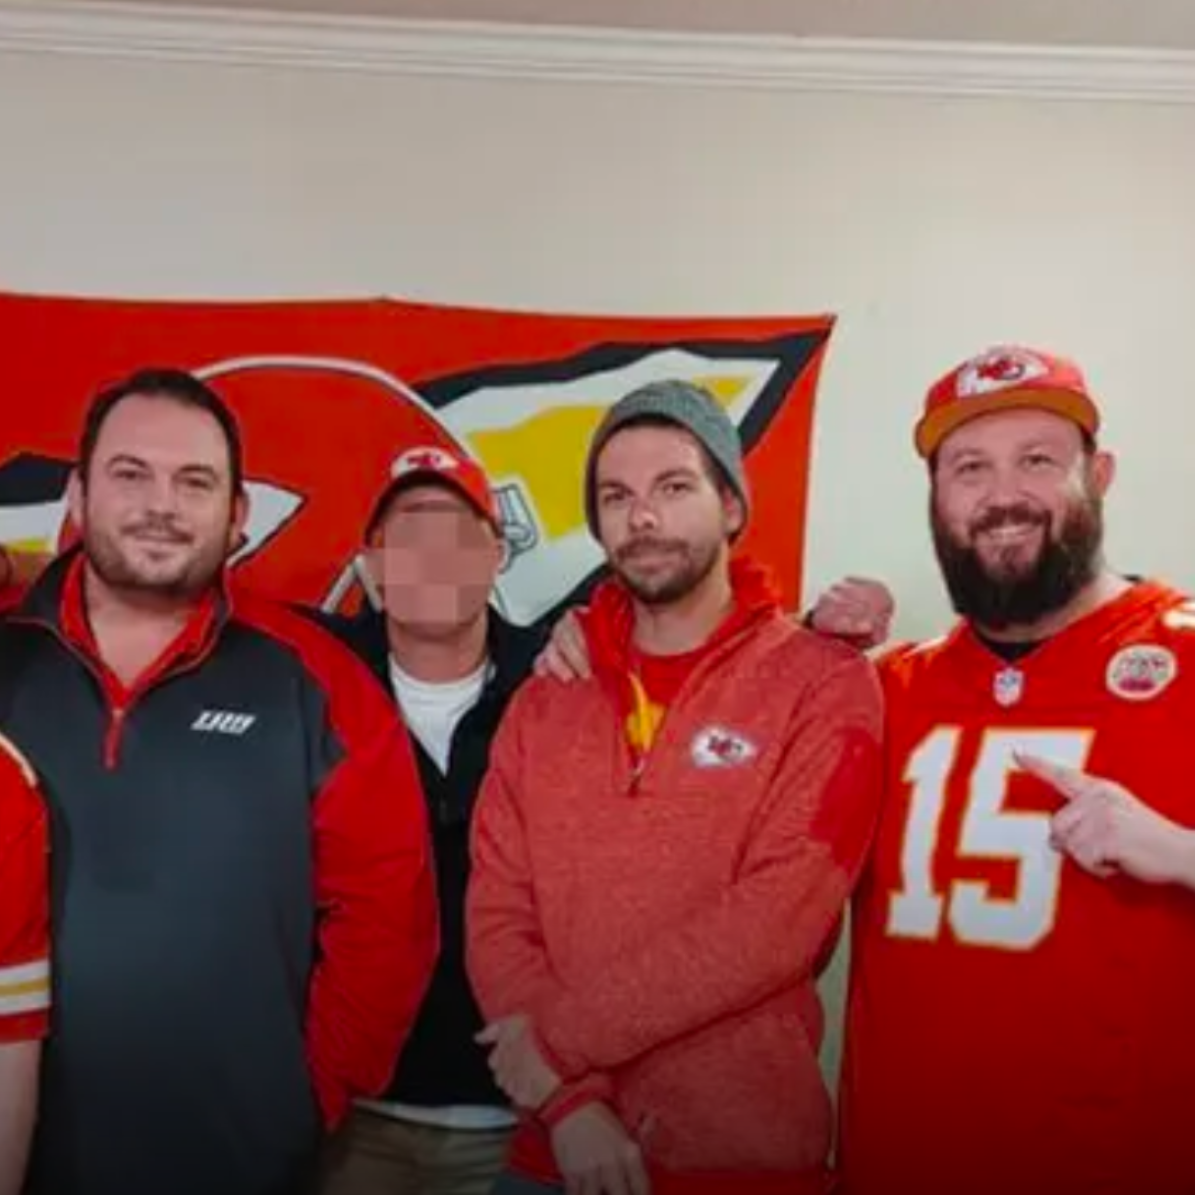 Parents Of Chiefs Fan Who Was Found Frozen To Death Say ‘There’s More To The Story’ After Toxicology Results Released